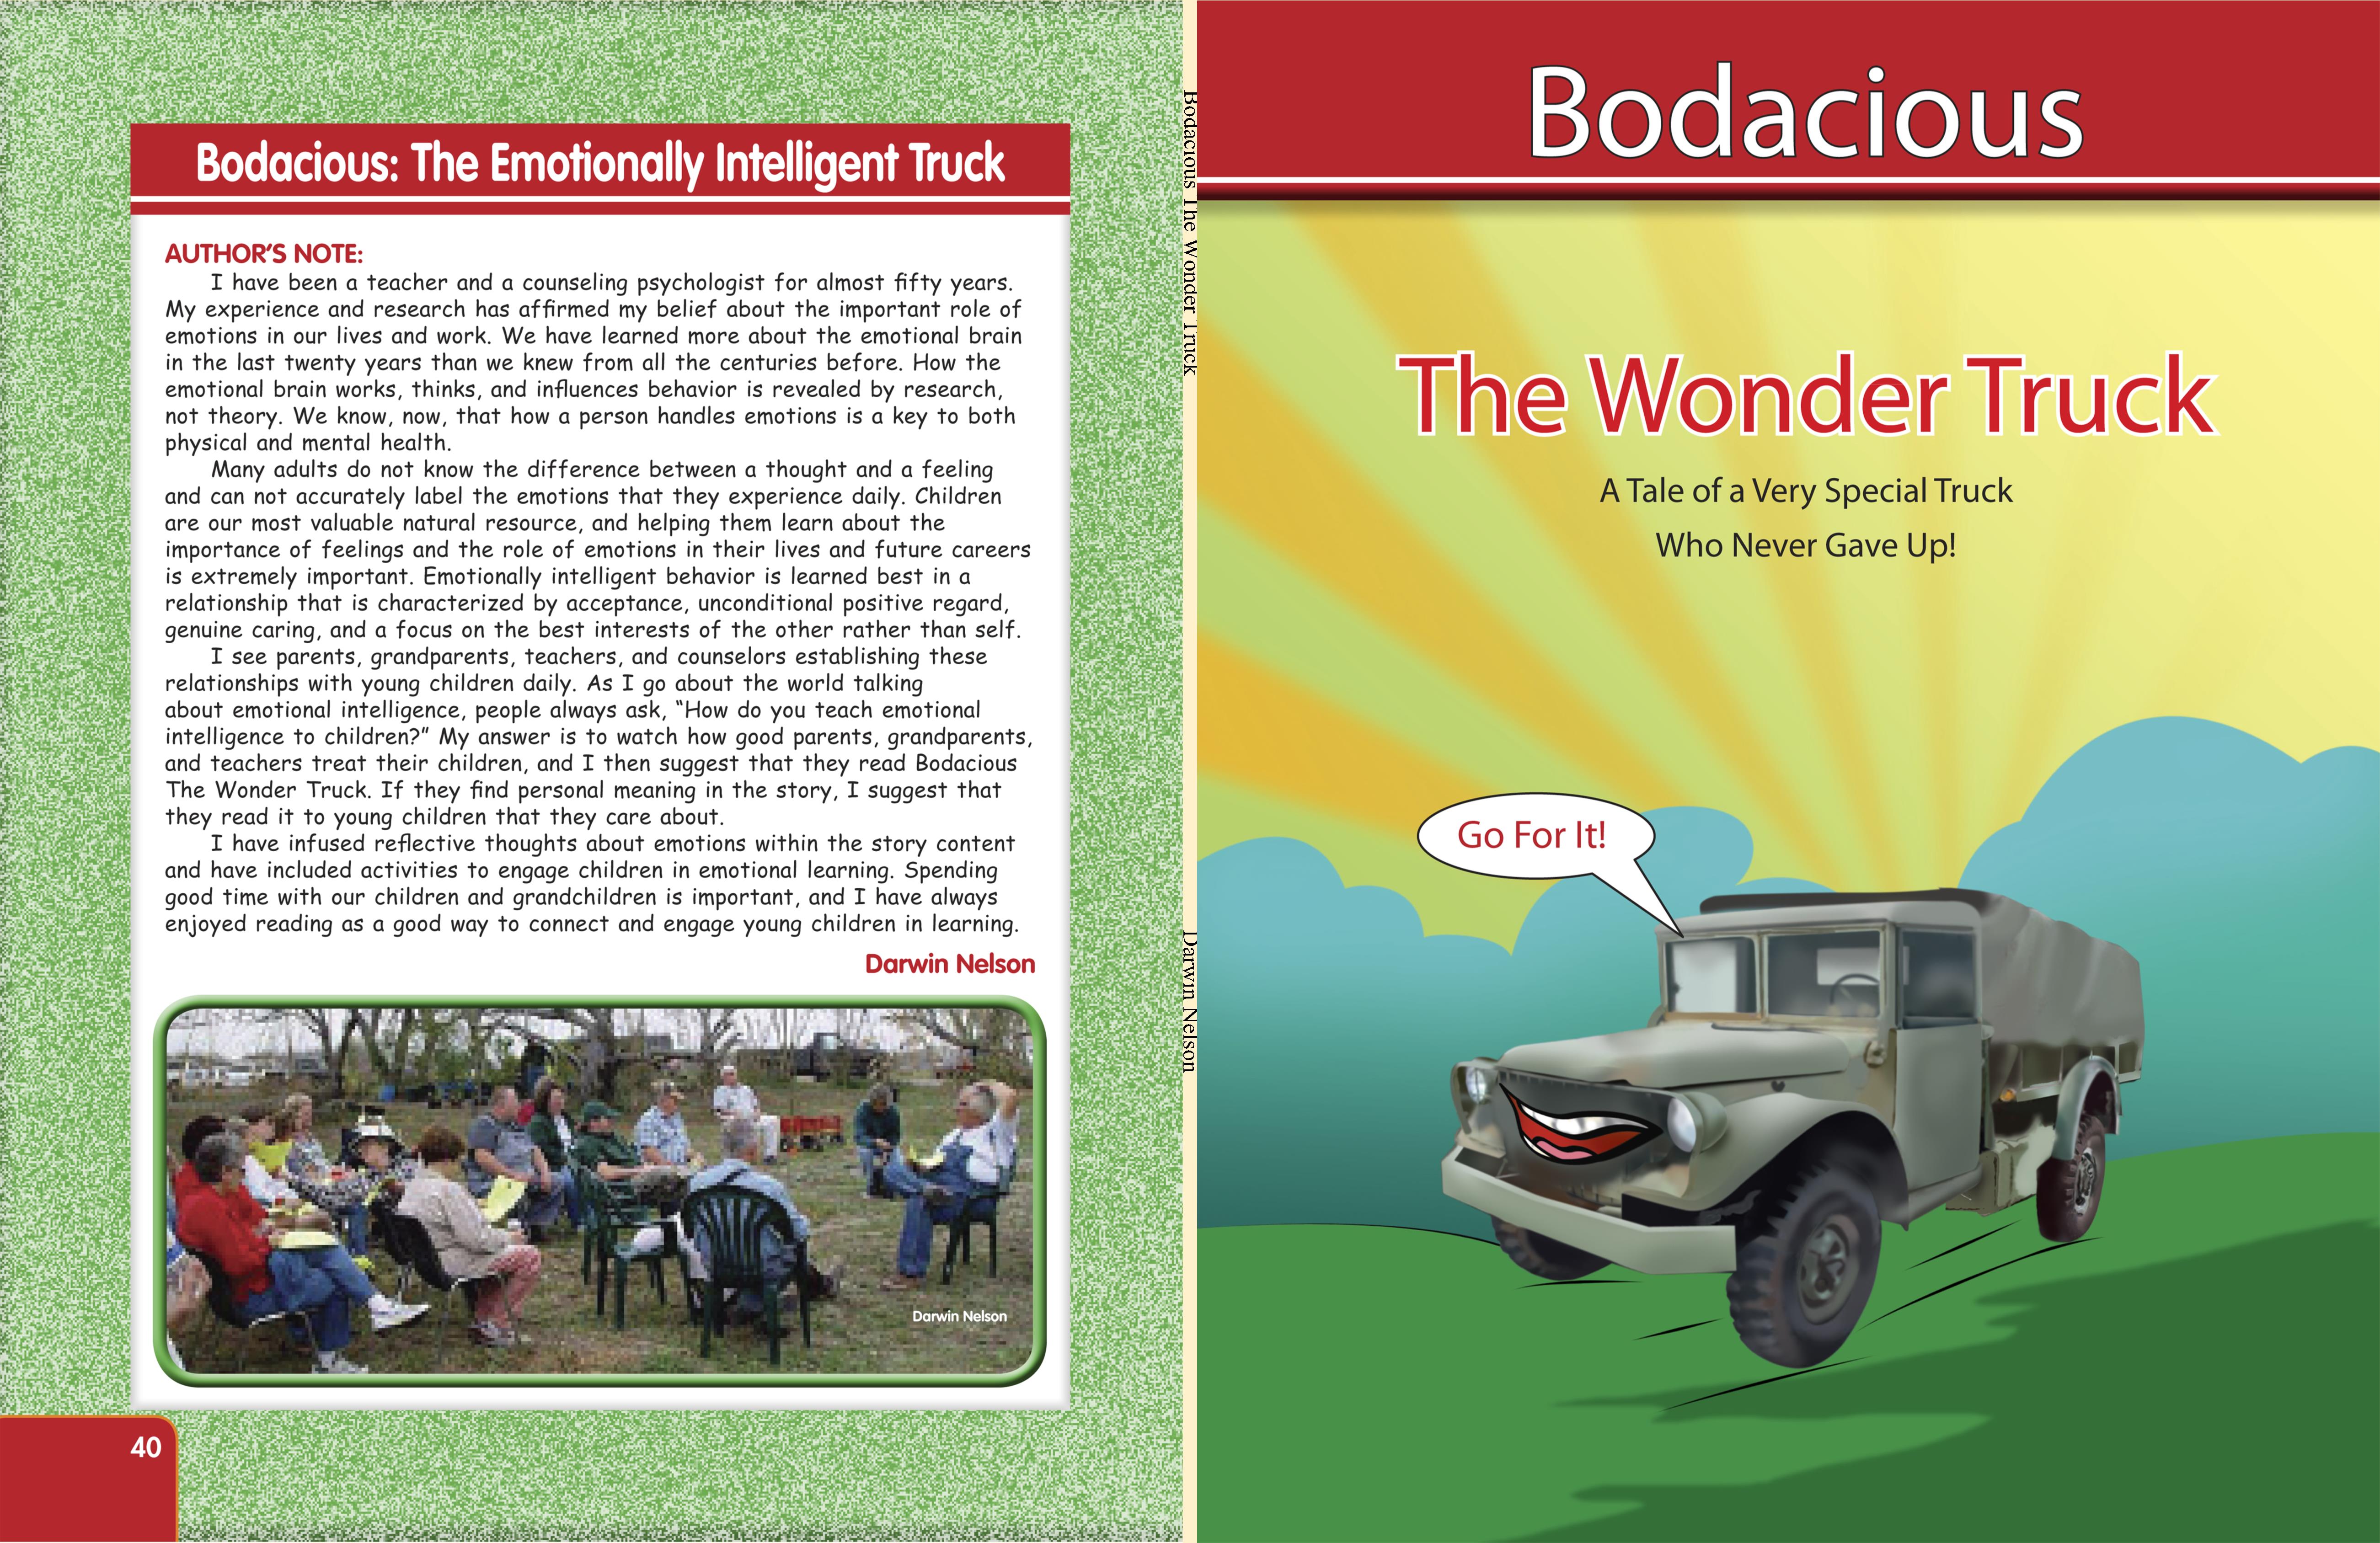 Bodacious The Wonder Truck cover image